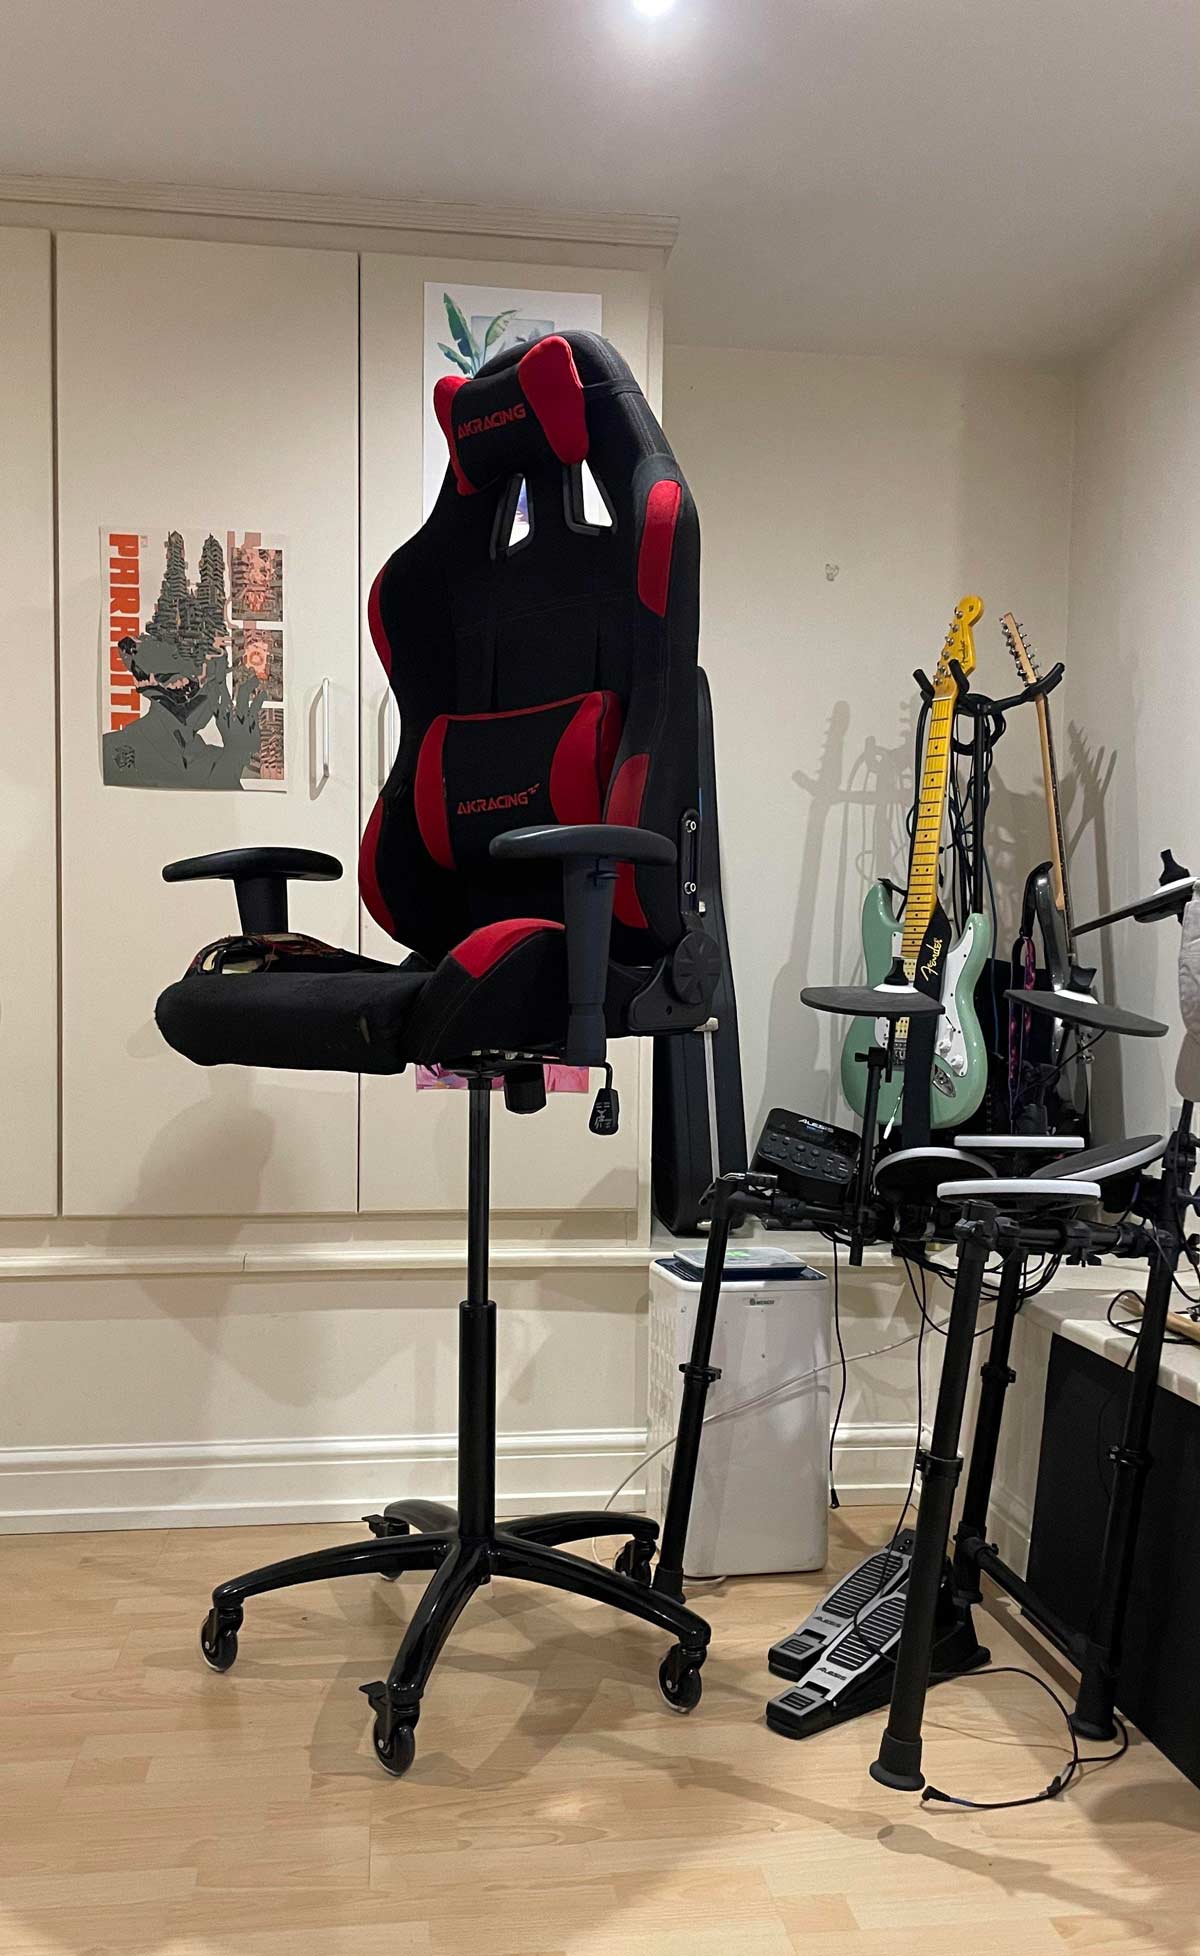 I made a mistake and bought the wrong gas lift for my chair